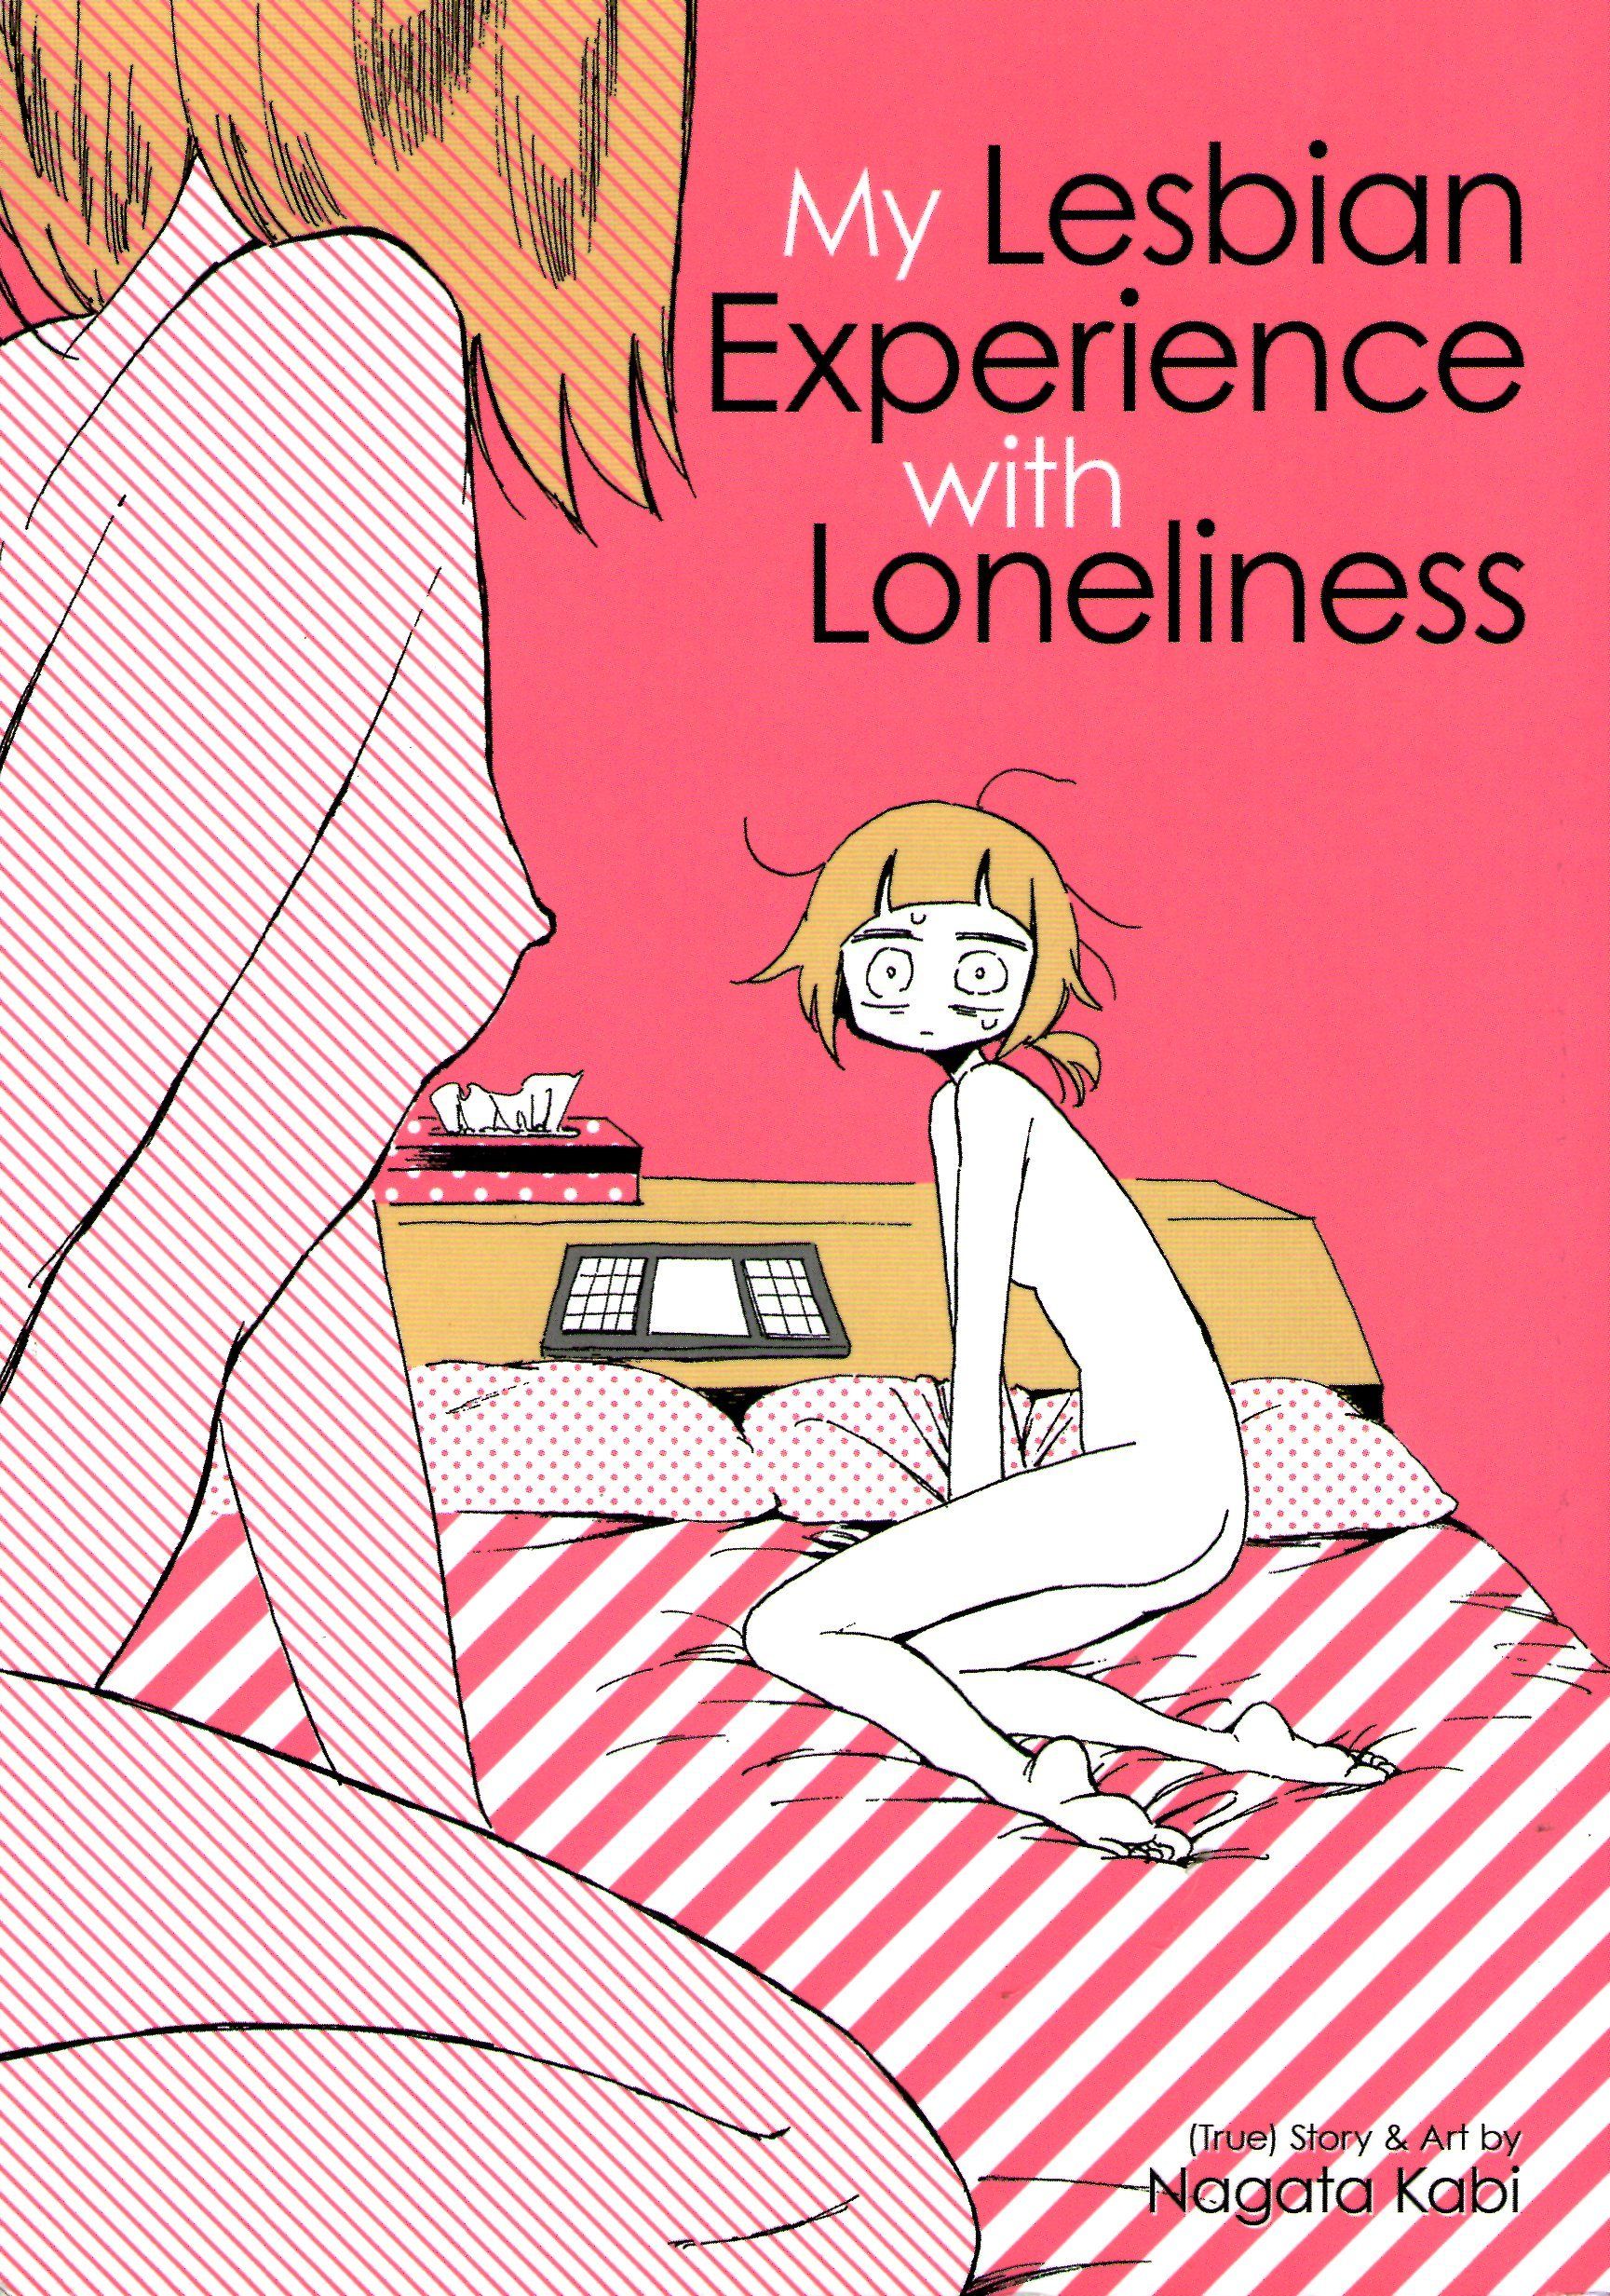 My Lesbian Experience with Loneliness book cover